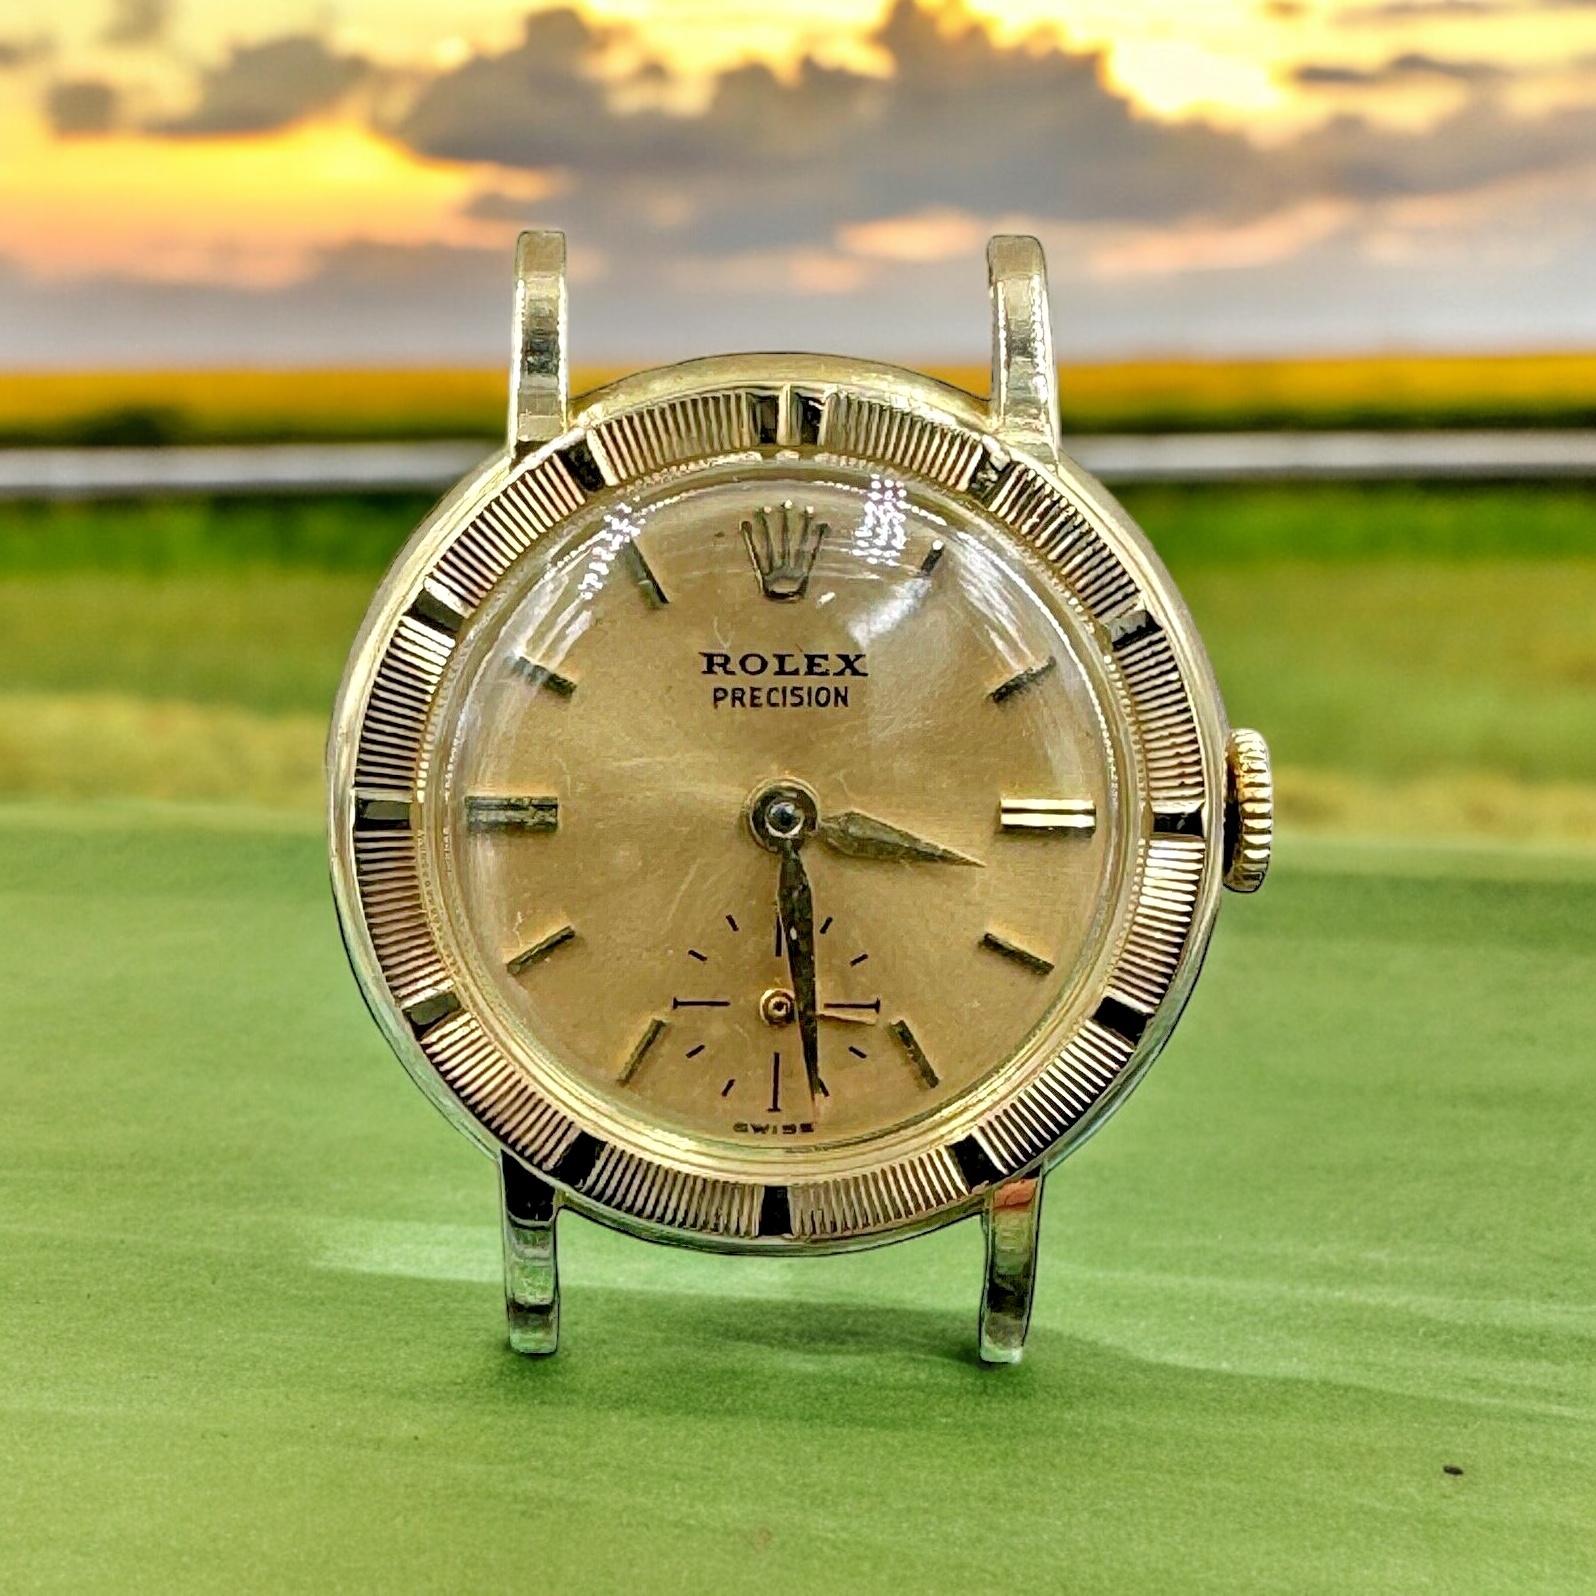 Ladies vintage Rolex yellow gold wristwatch, circa 1950s.

The Ladies Vintage Rolex Yellow Gold Wristwatch, Circa 1950s is rare and highly collectable.  With its engine turned bezel and yellow gold case, this Rolex is a timeless piece of elegance